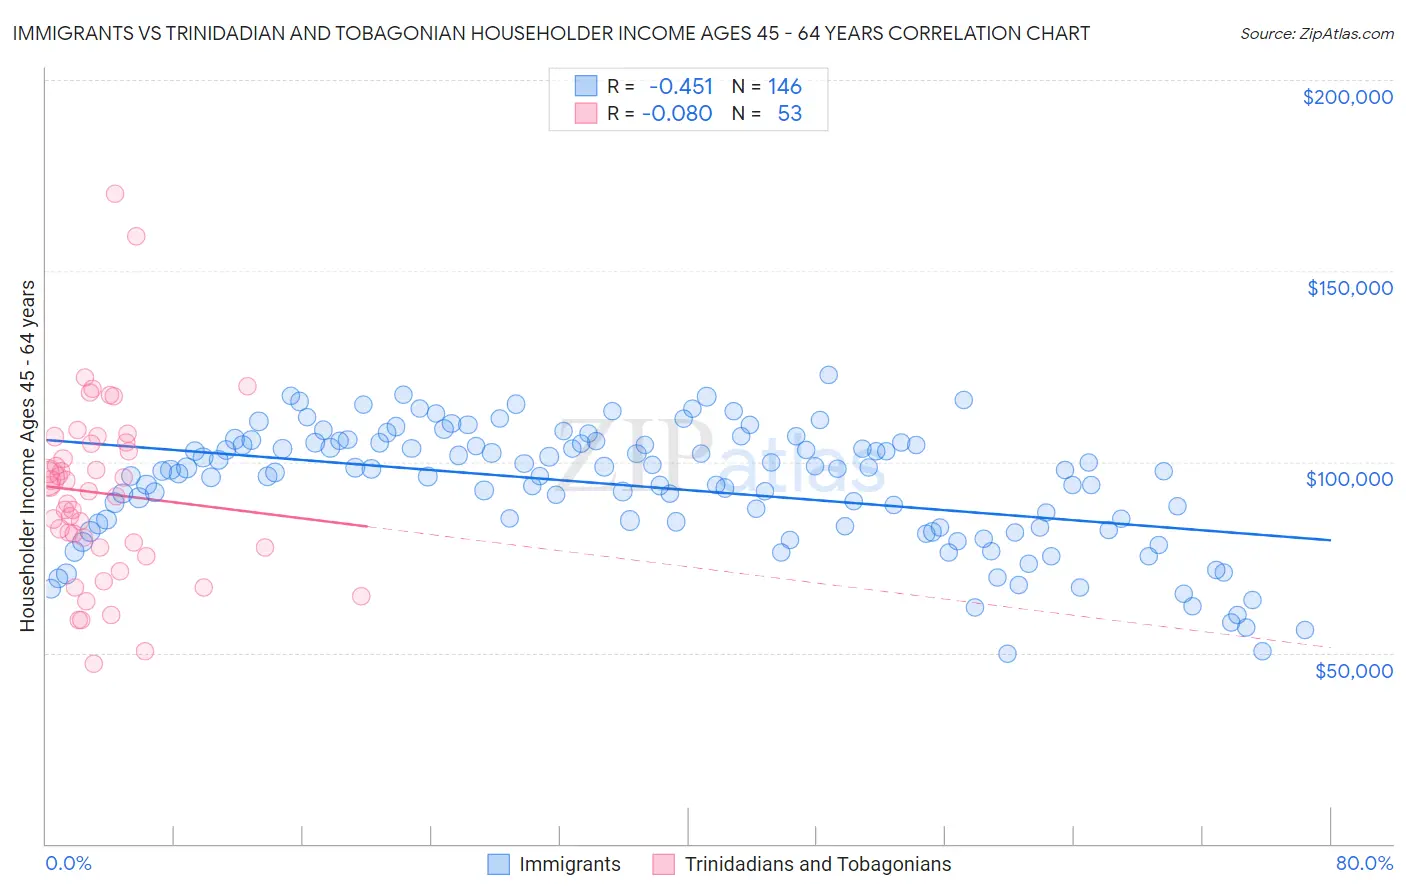 Immigrants vs Trinidadian and Tobagonian Householder Income Ages 45 - 64 years